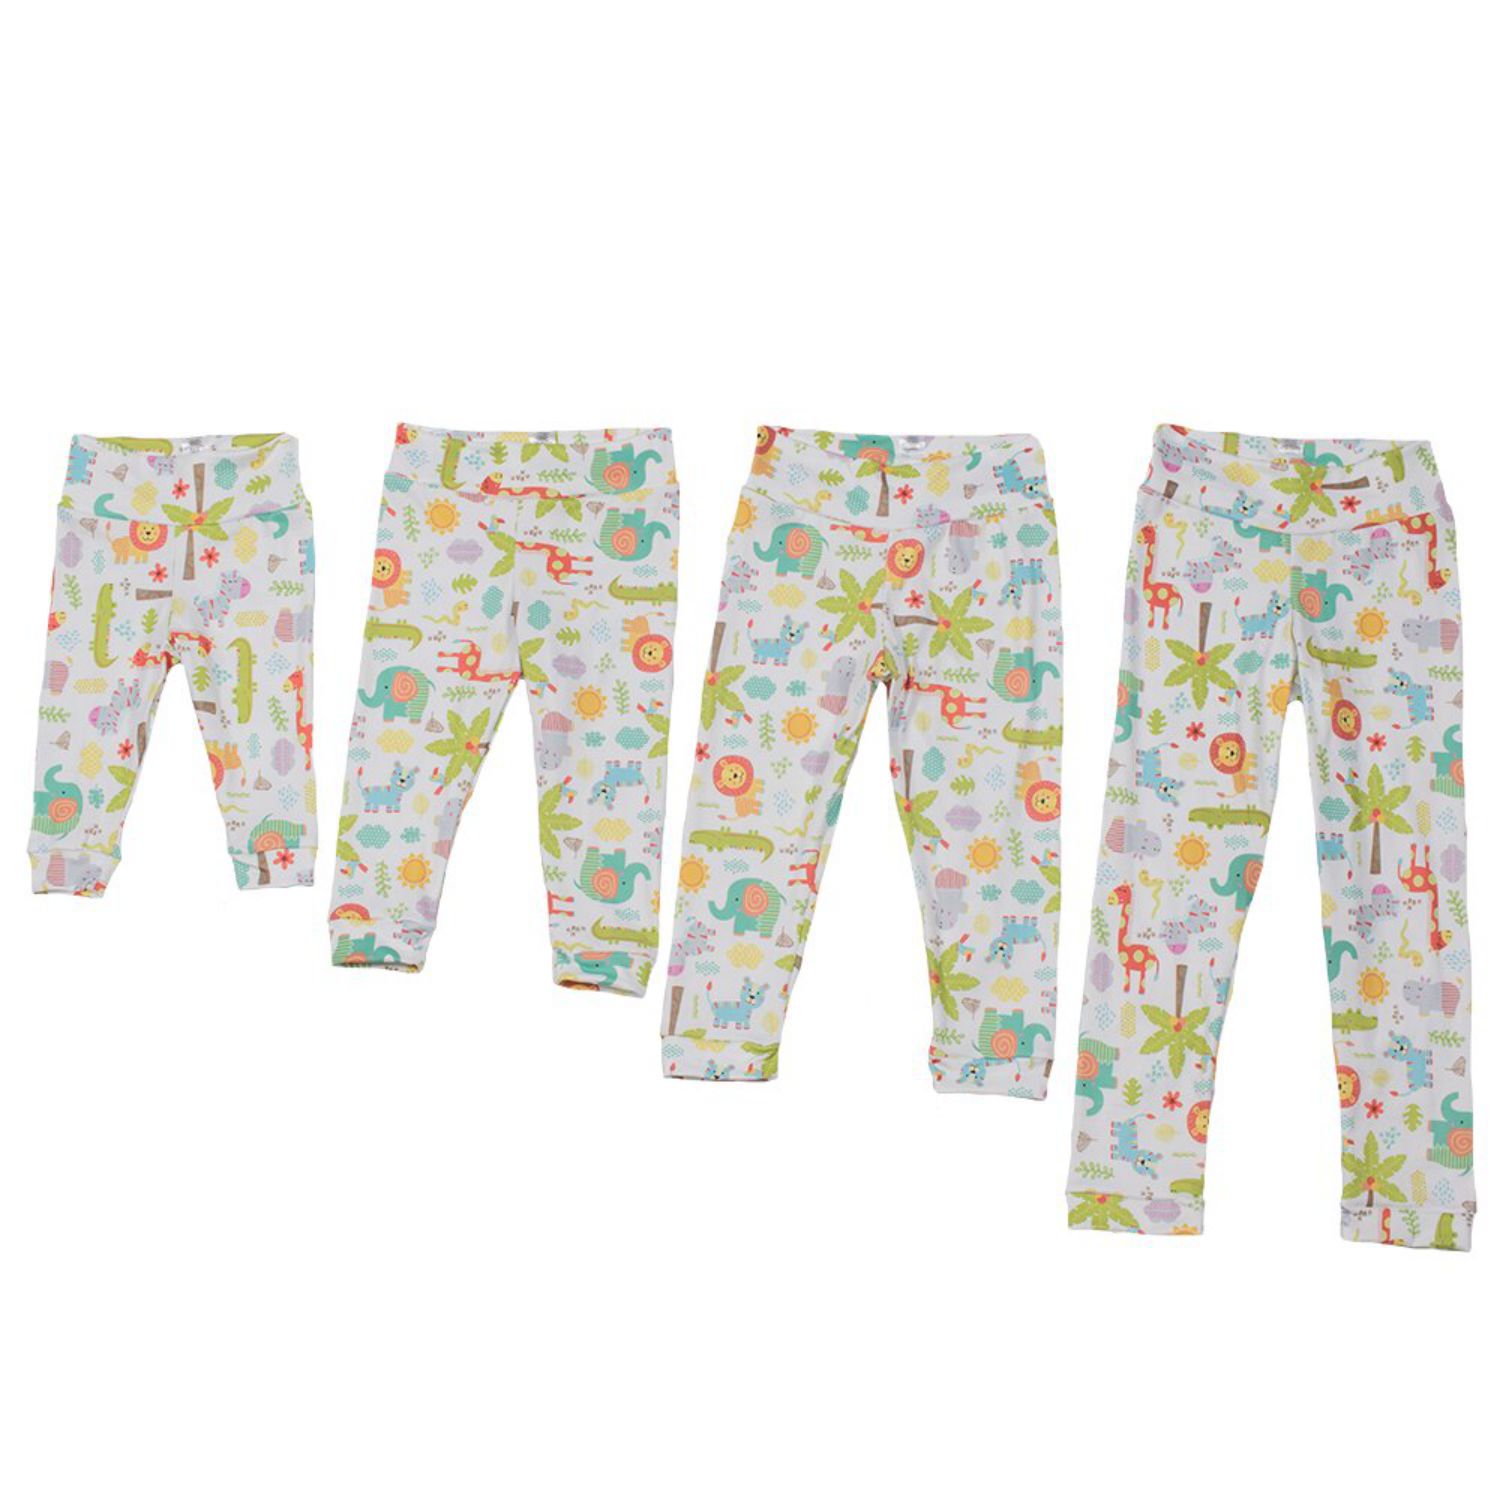 Bumblito Leggings Größe: S (50 - 68) / Muster: Wild About you